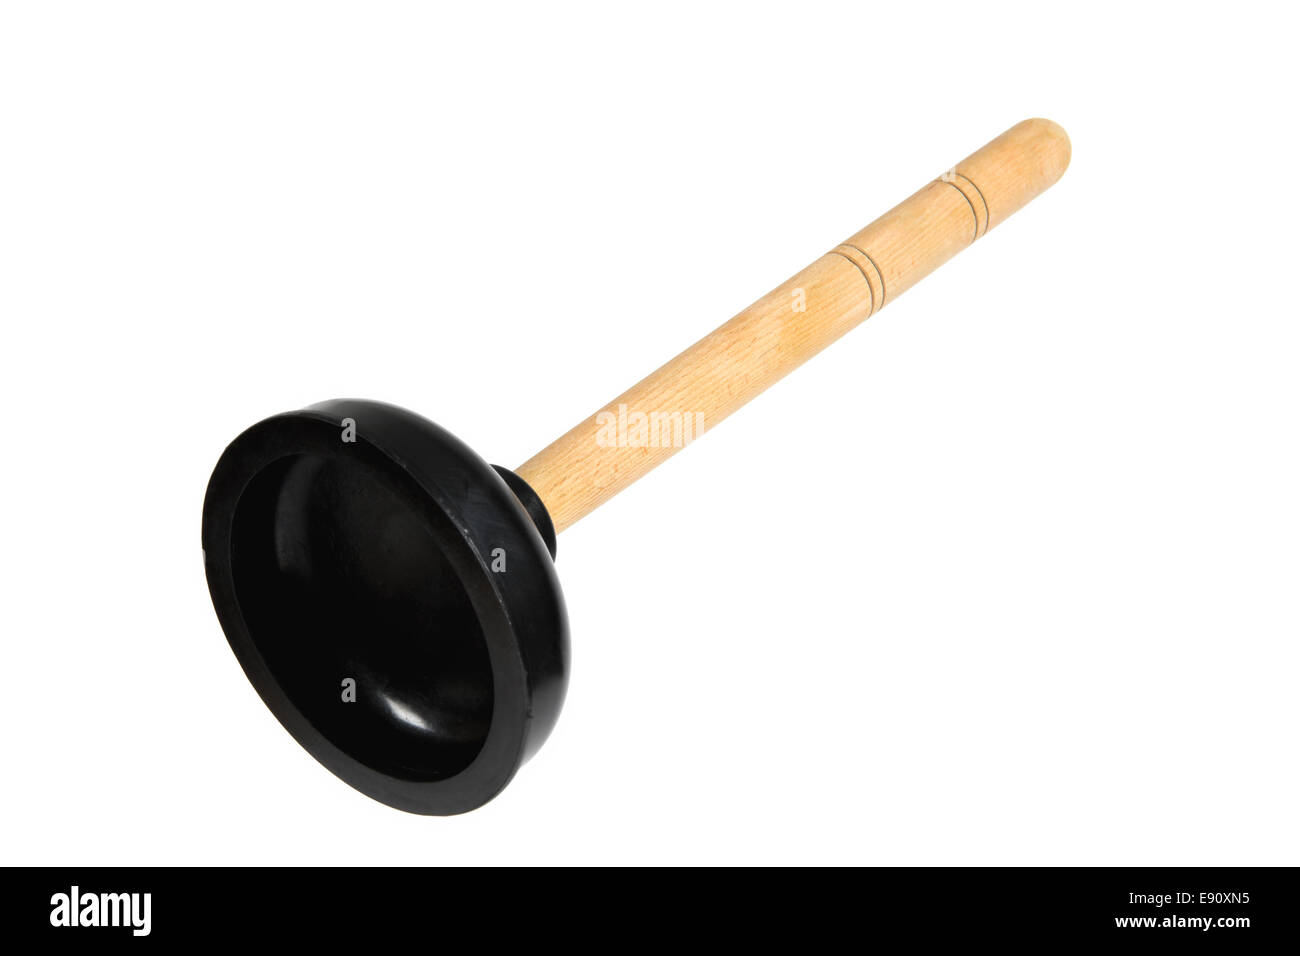 Plunger Stock Photo